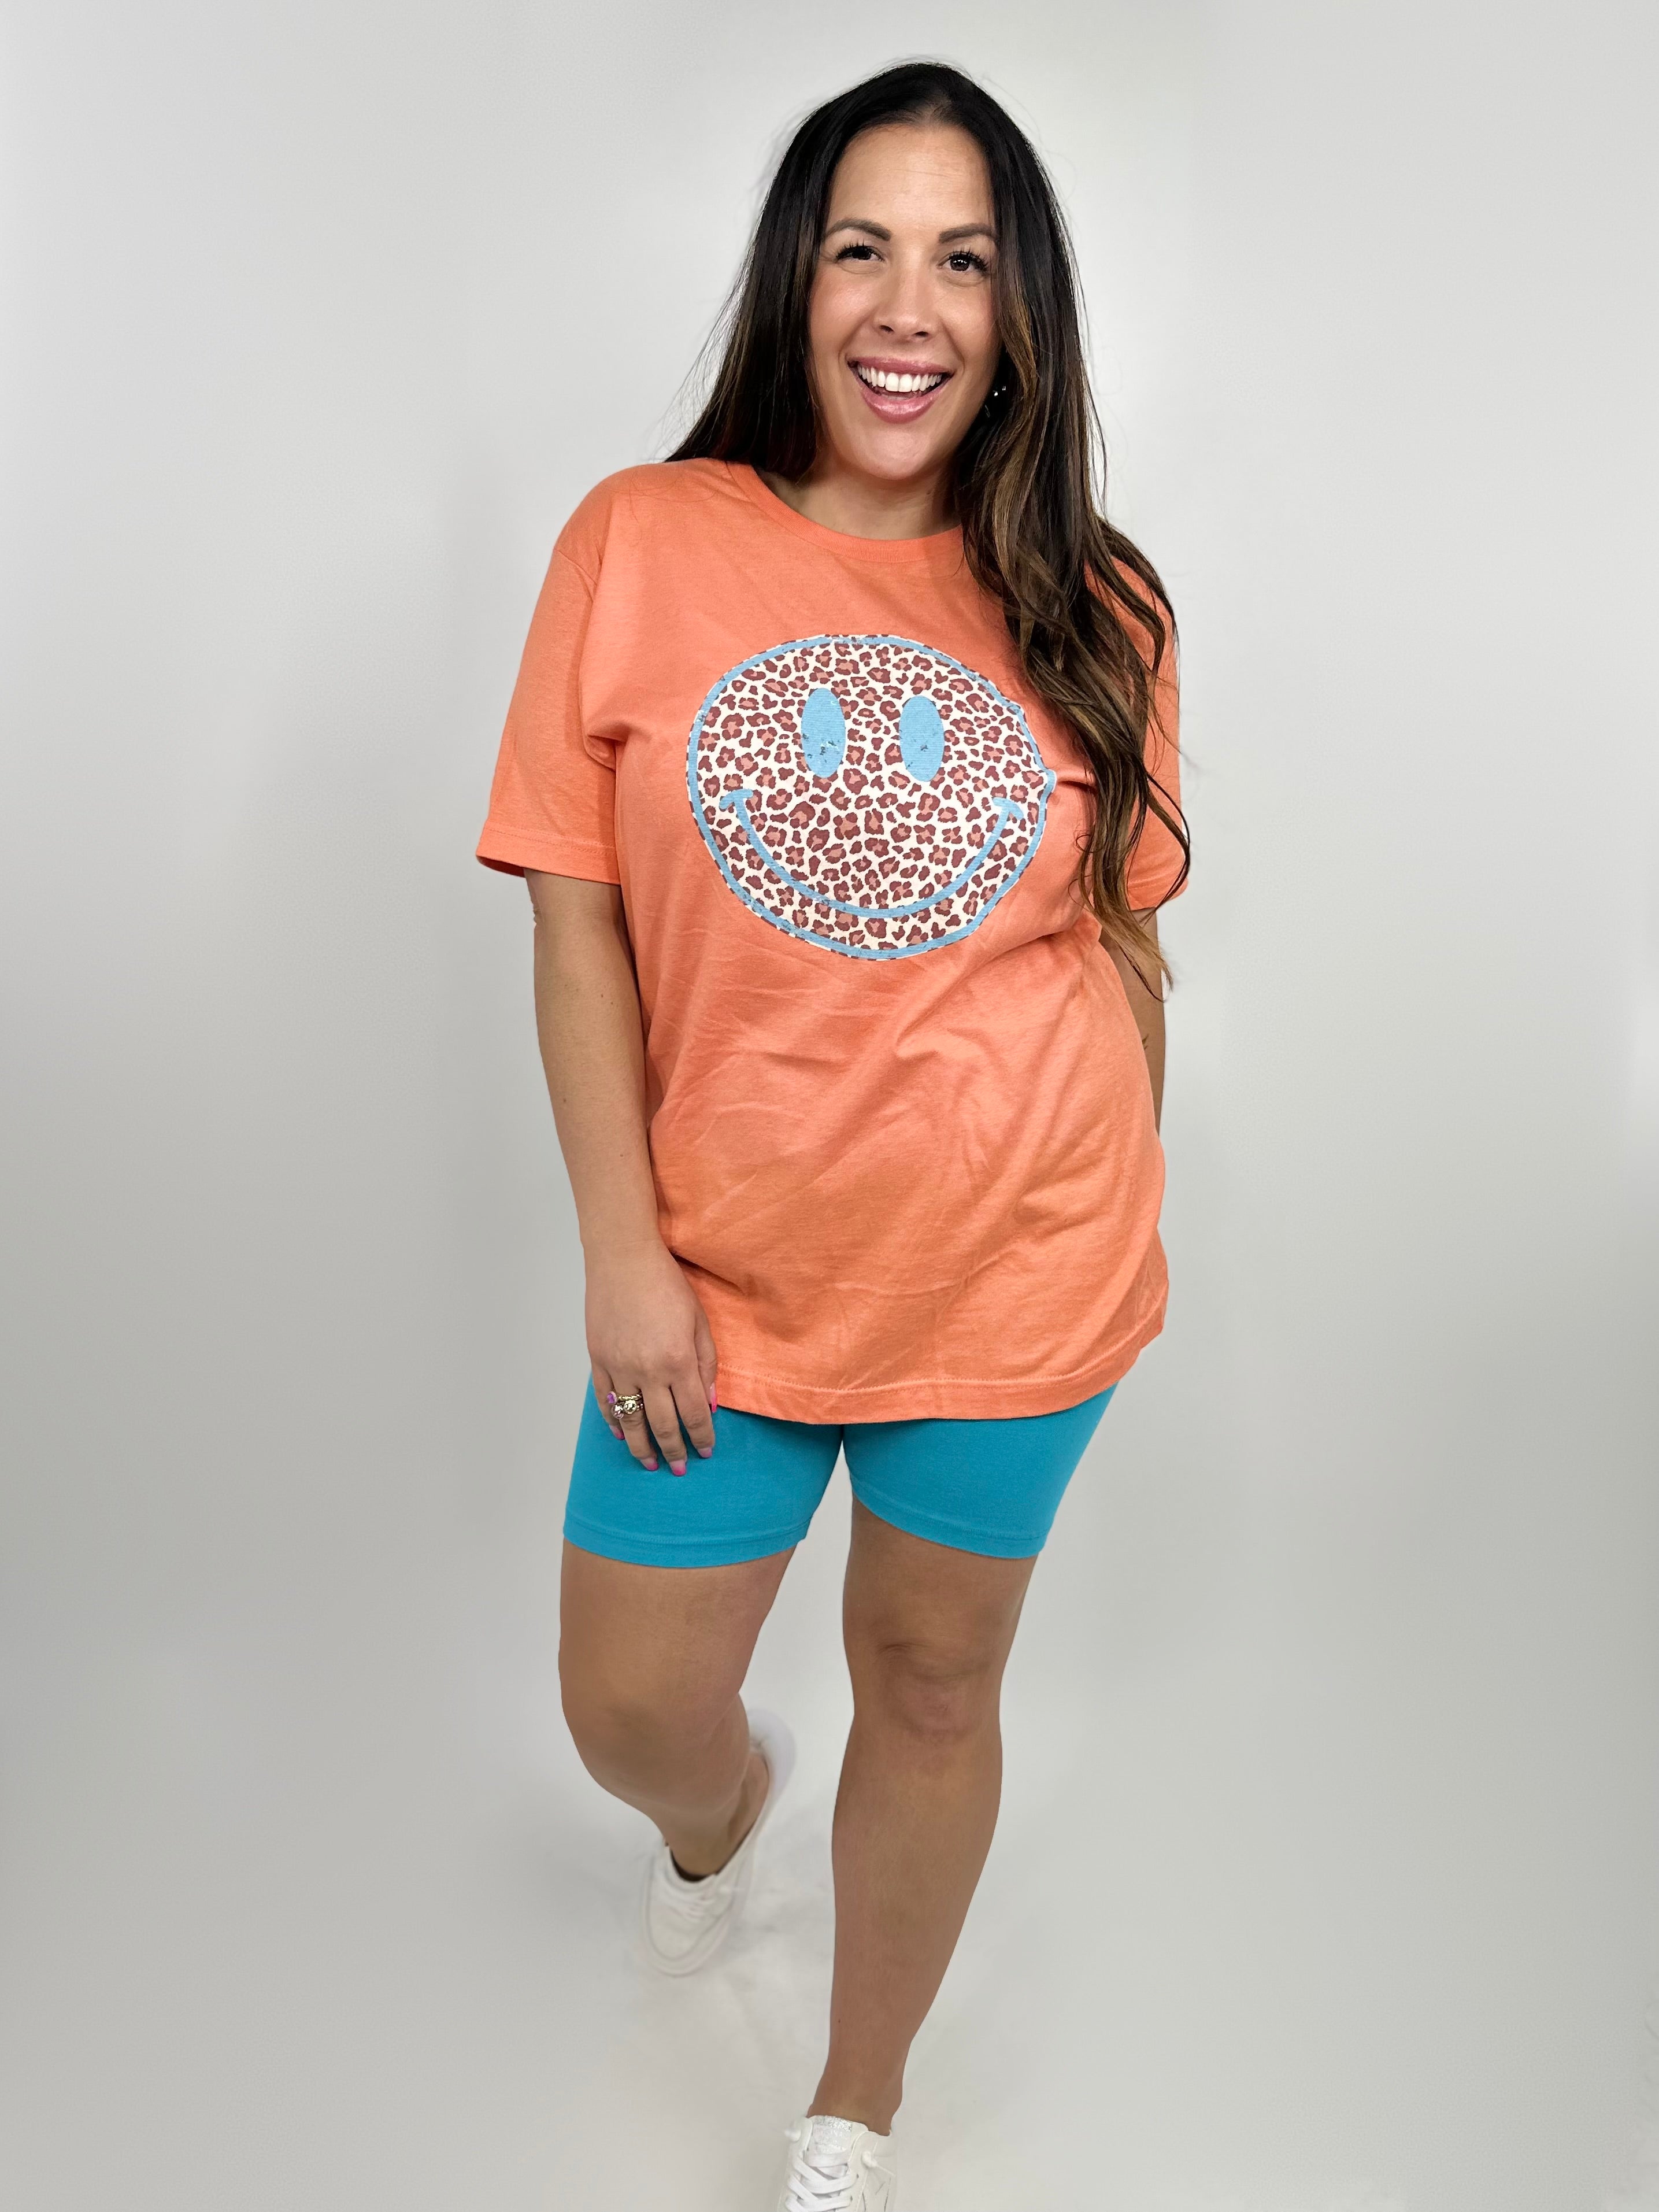 Leopard Smiley Graphic Tee-130 Graphic Tees-Heathered Boho-Heathered Boho Boutique, Women's Fashion and Accessories in Palmetto, FL